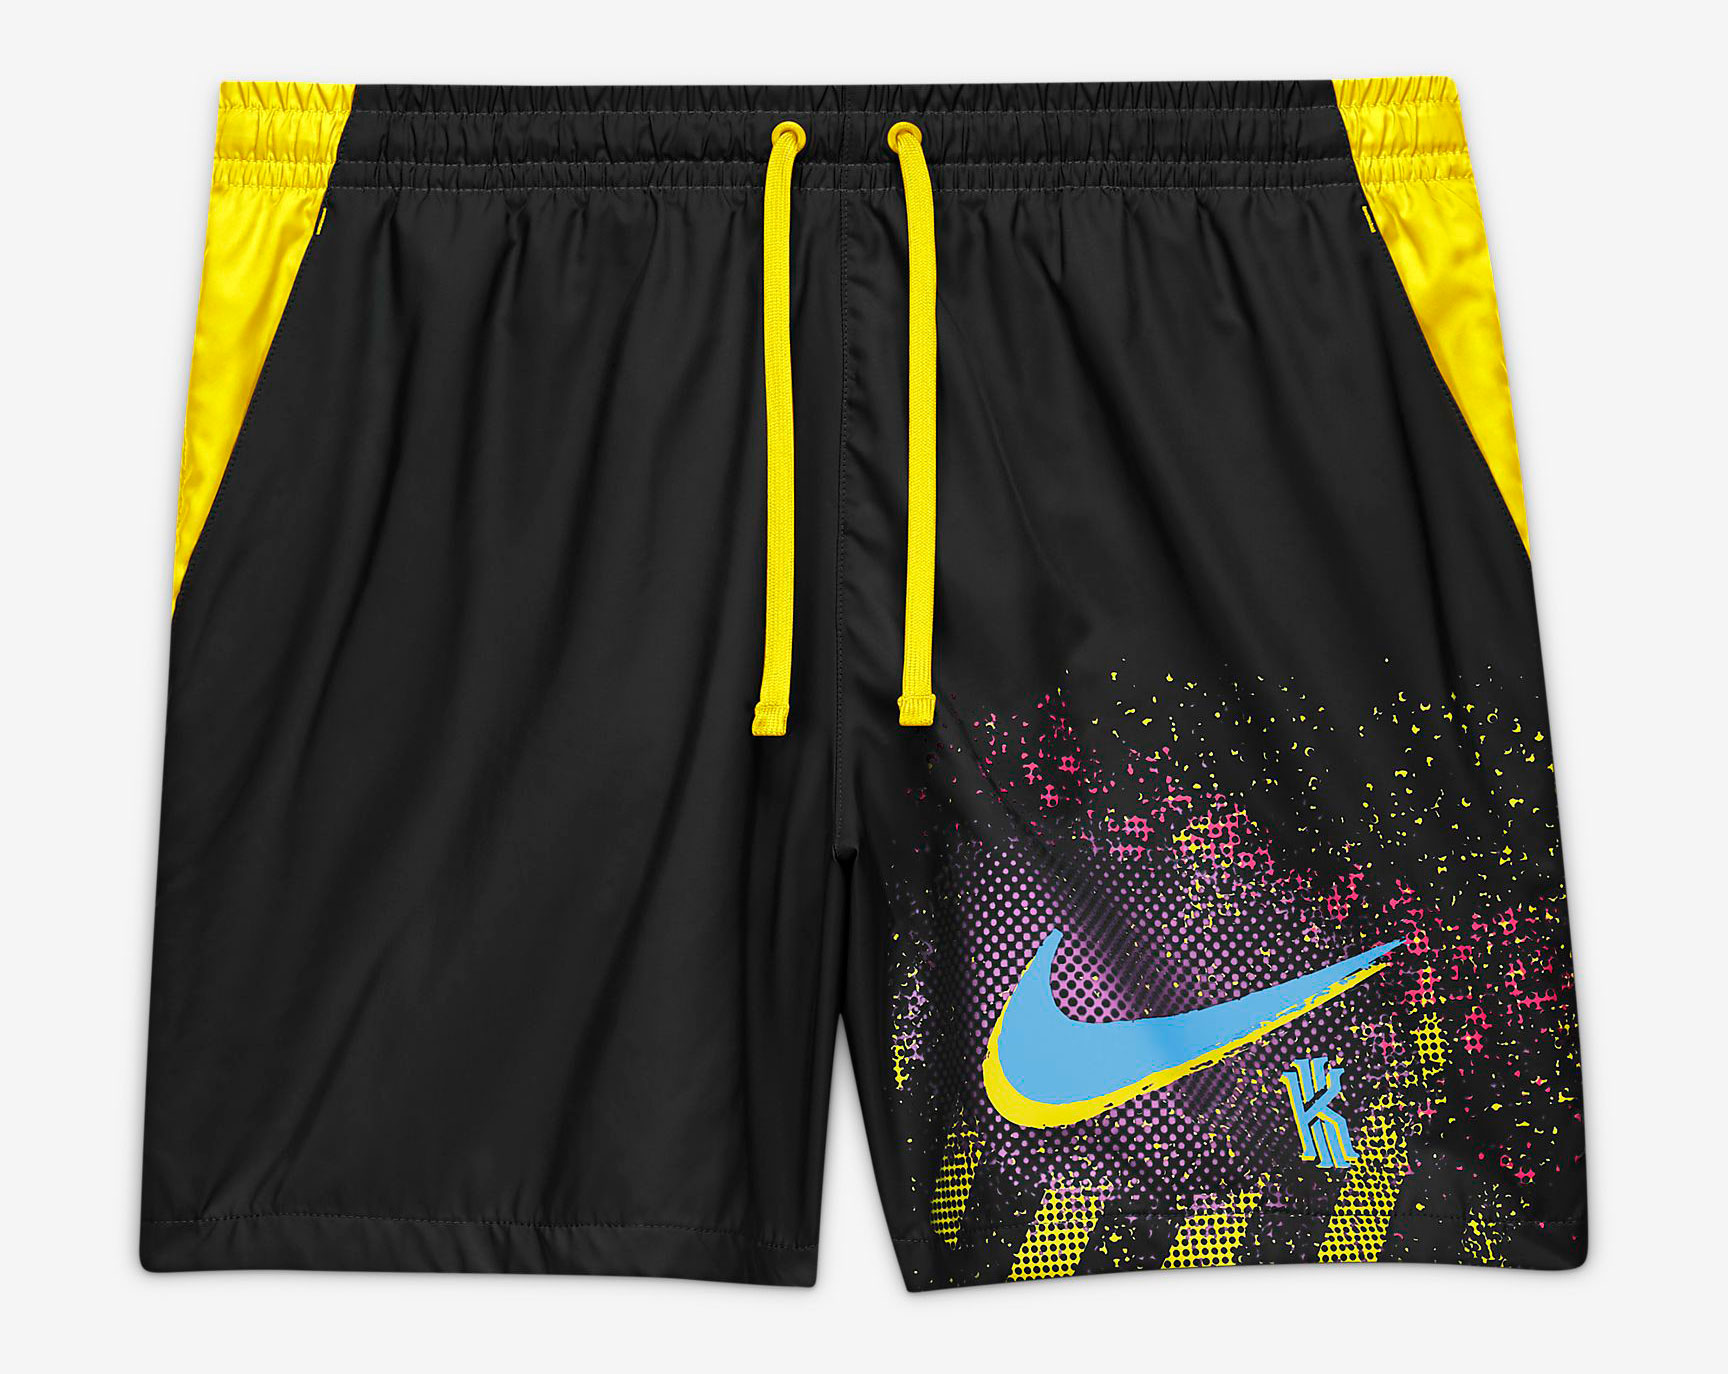 Nike Kyrie 6 Asia Irving Clothing Match | SneakerFits.com